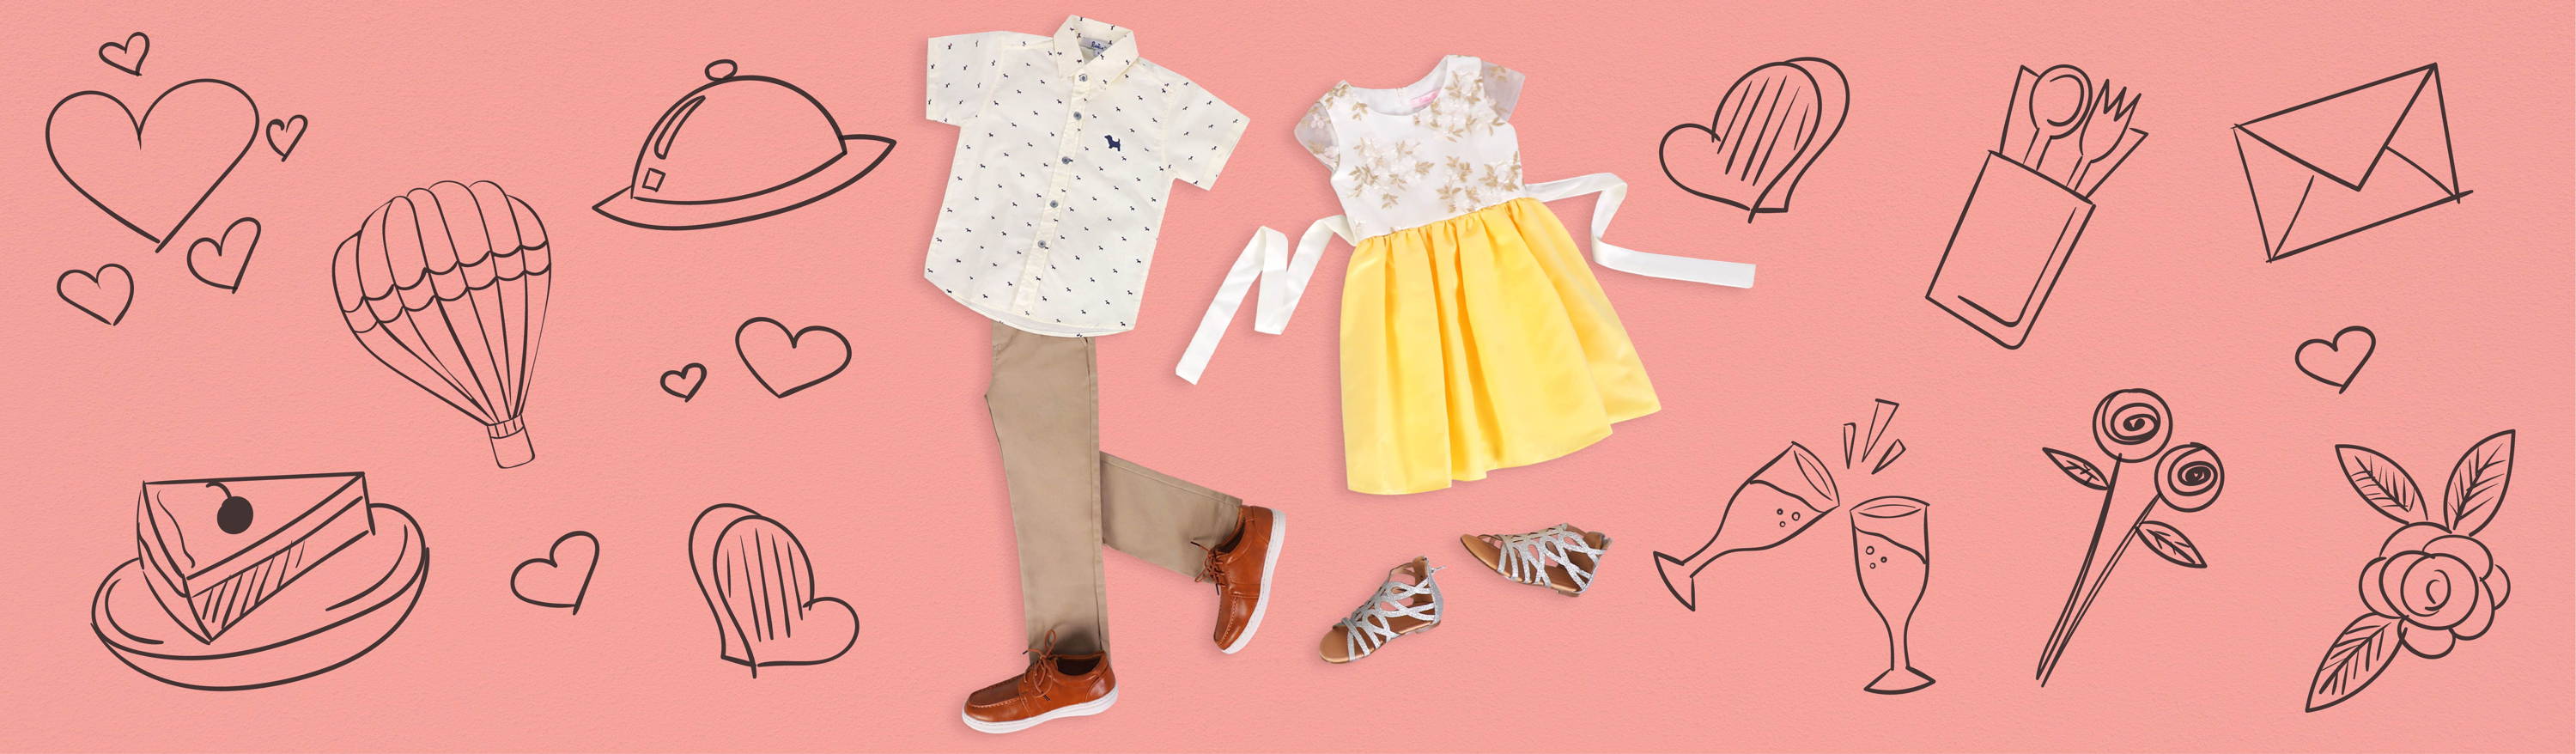 Delightful Dress-Up Ideas for the Kids